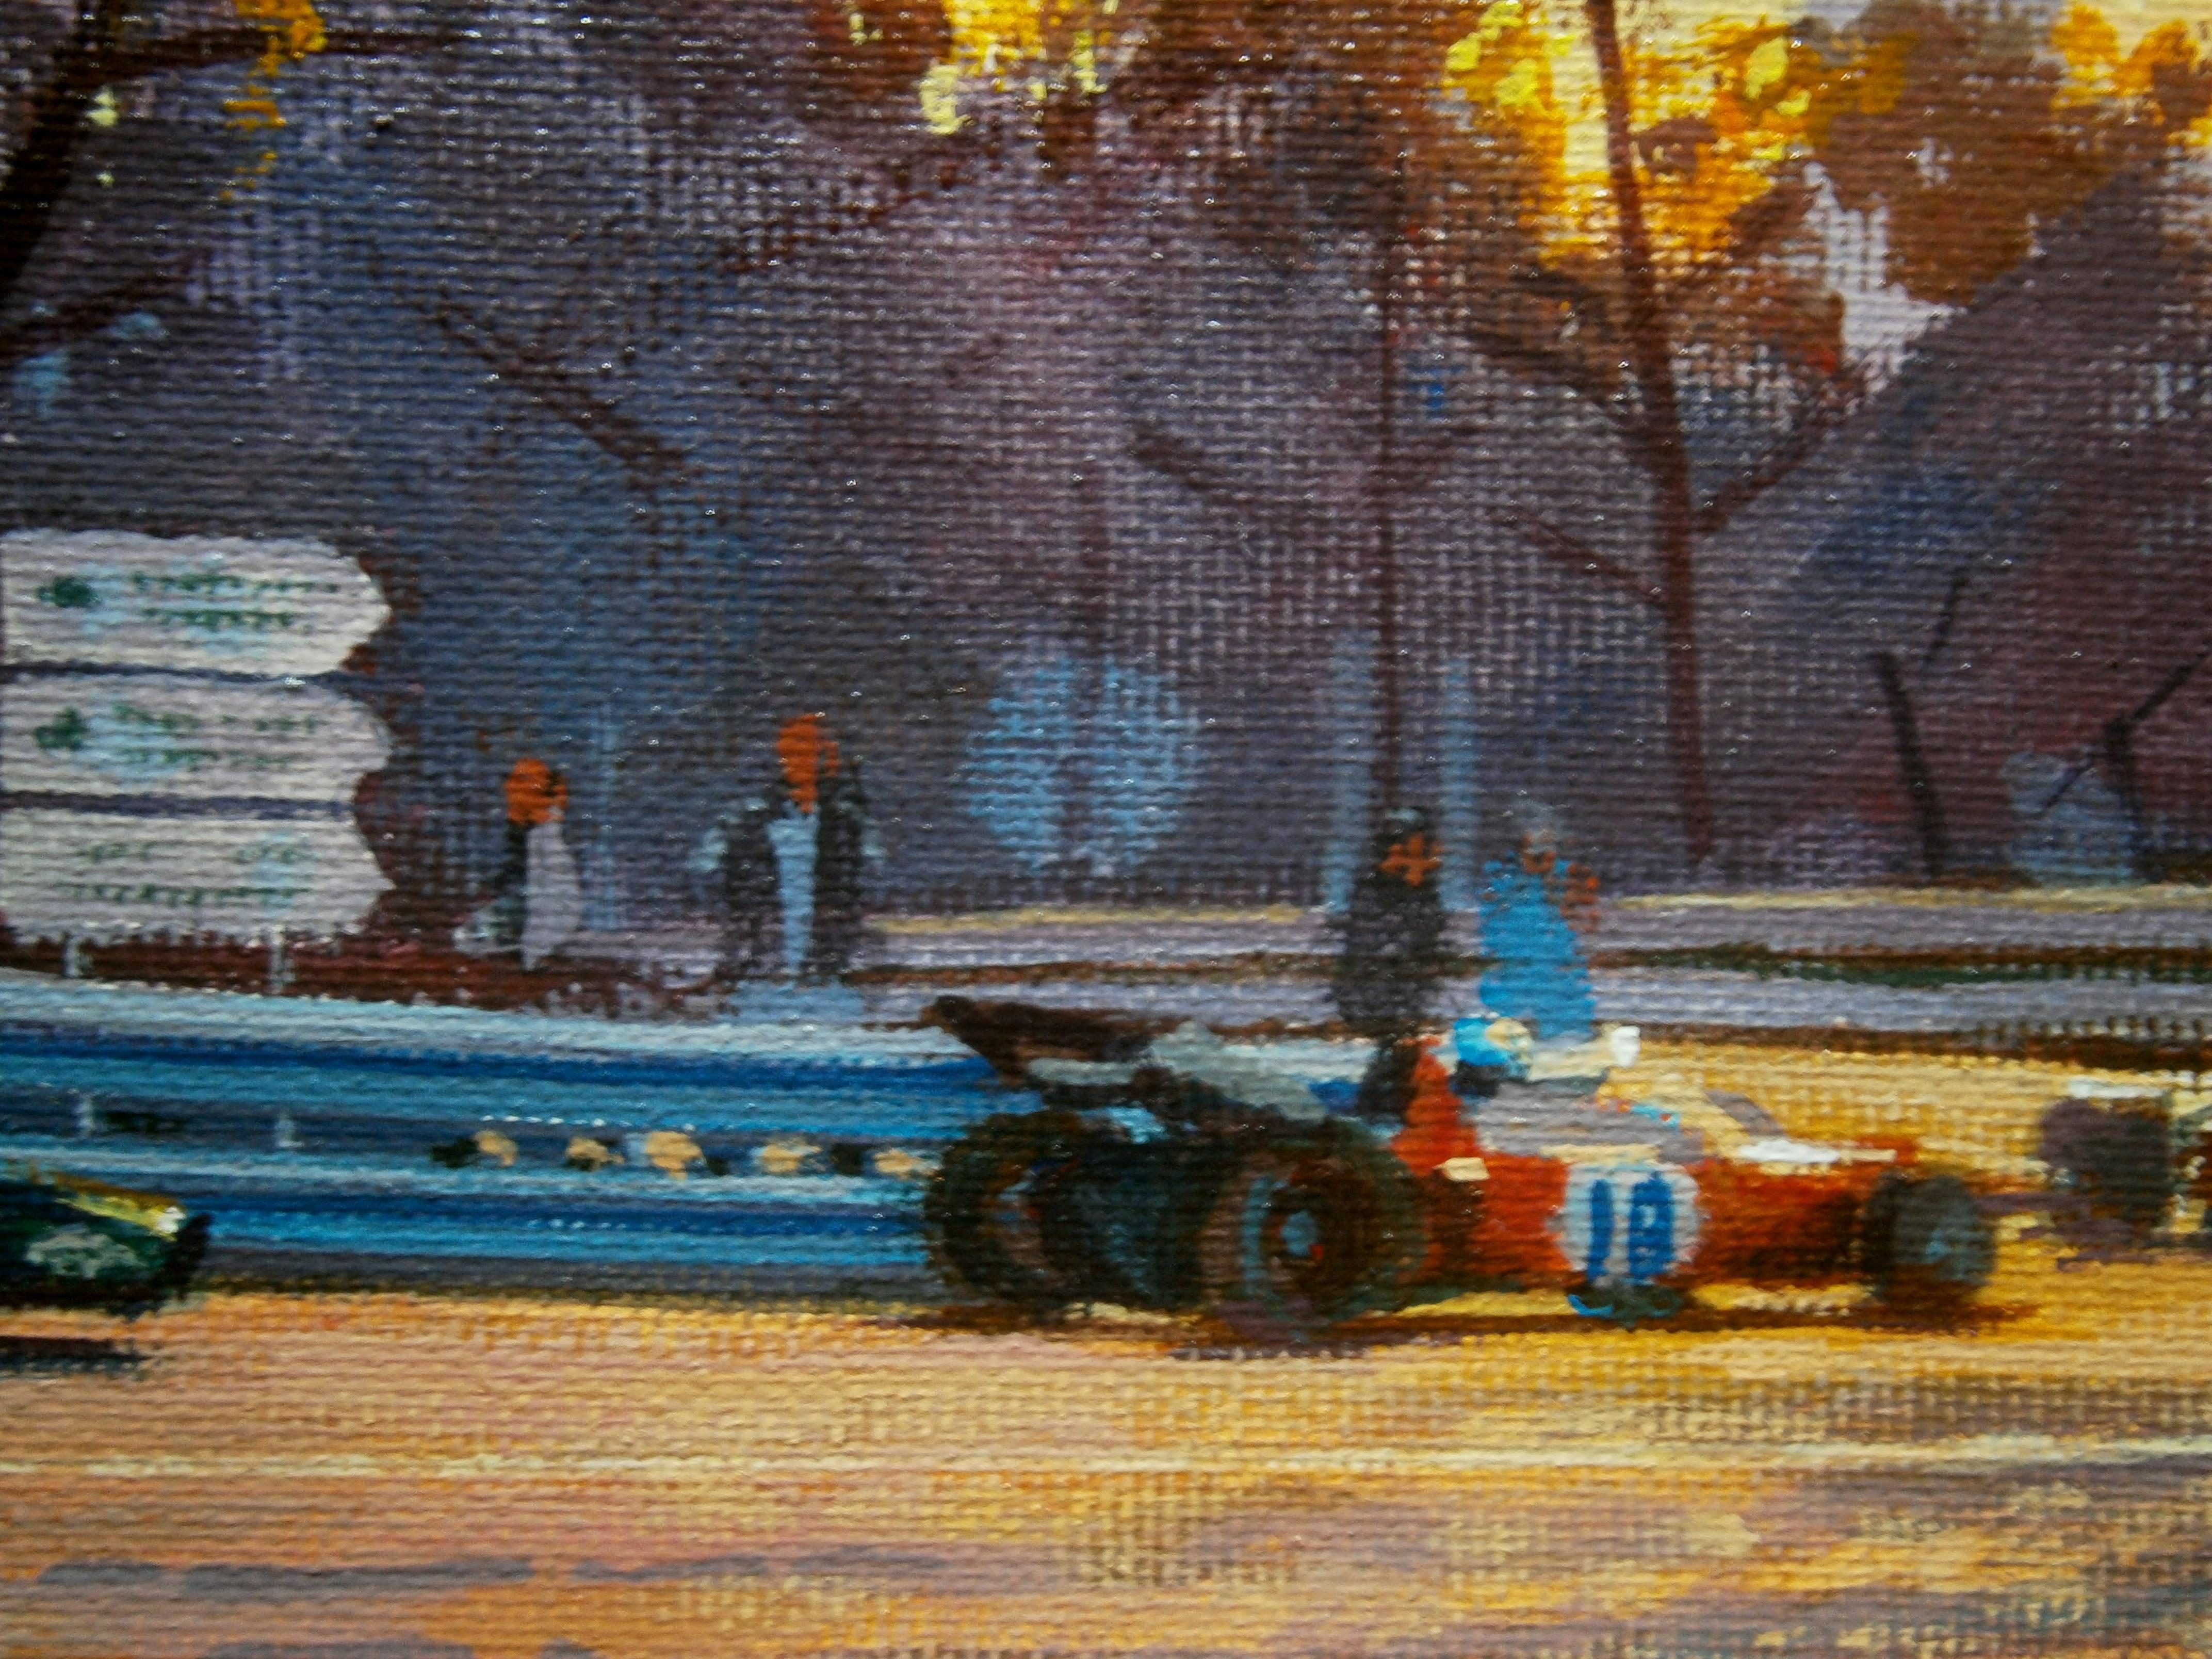 Ronnie Peterson & Graham Hill. Circuito Montjuit. 1971 original painting
BALAGUER , Alex ( Barcelona 1968 )
During early childhood, Àlex Balaguer began to sketch motorcars symbolic of Maranello’s trademark vehicle.
Self-taught in the art world,